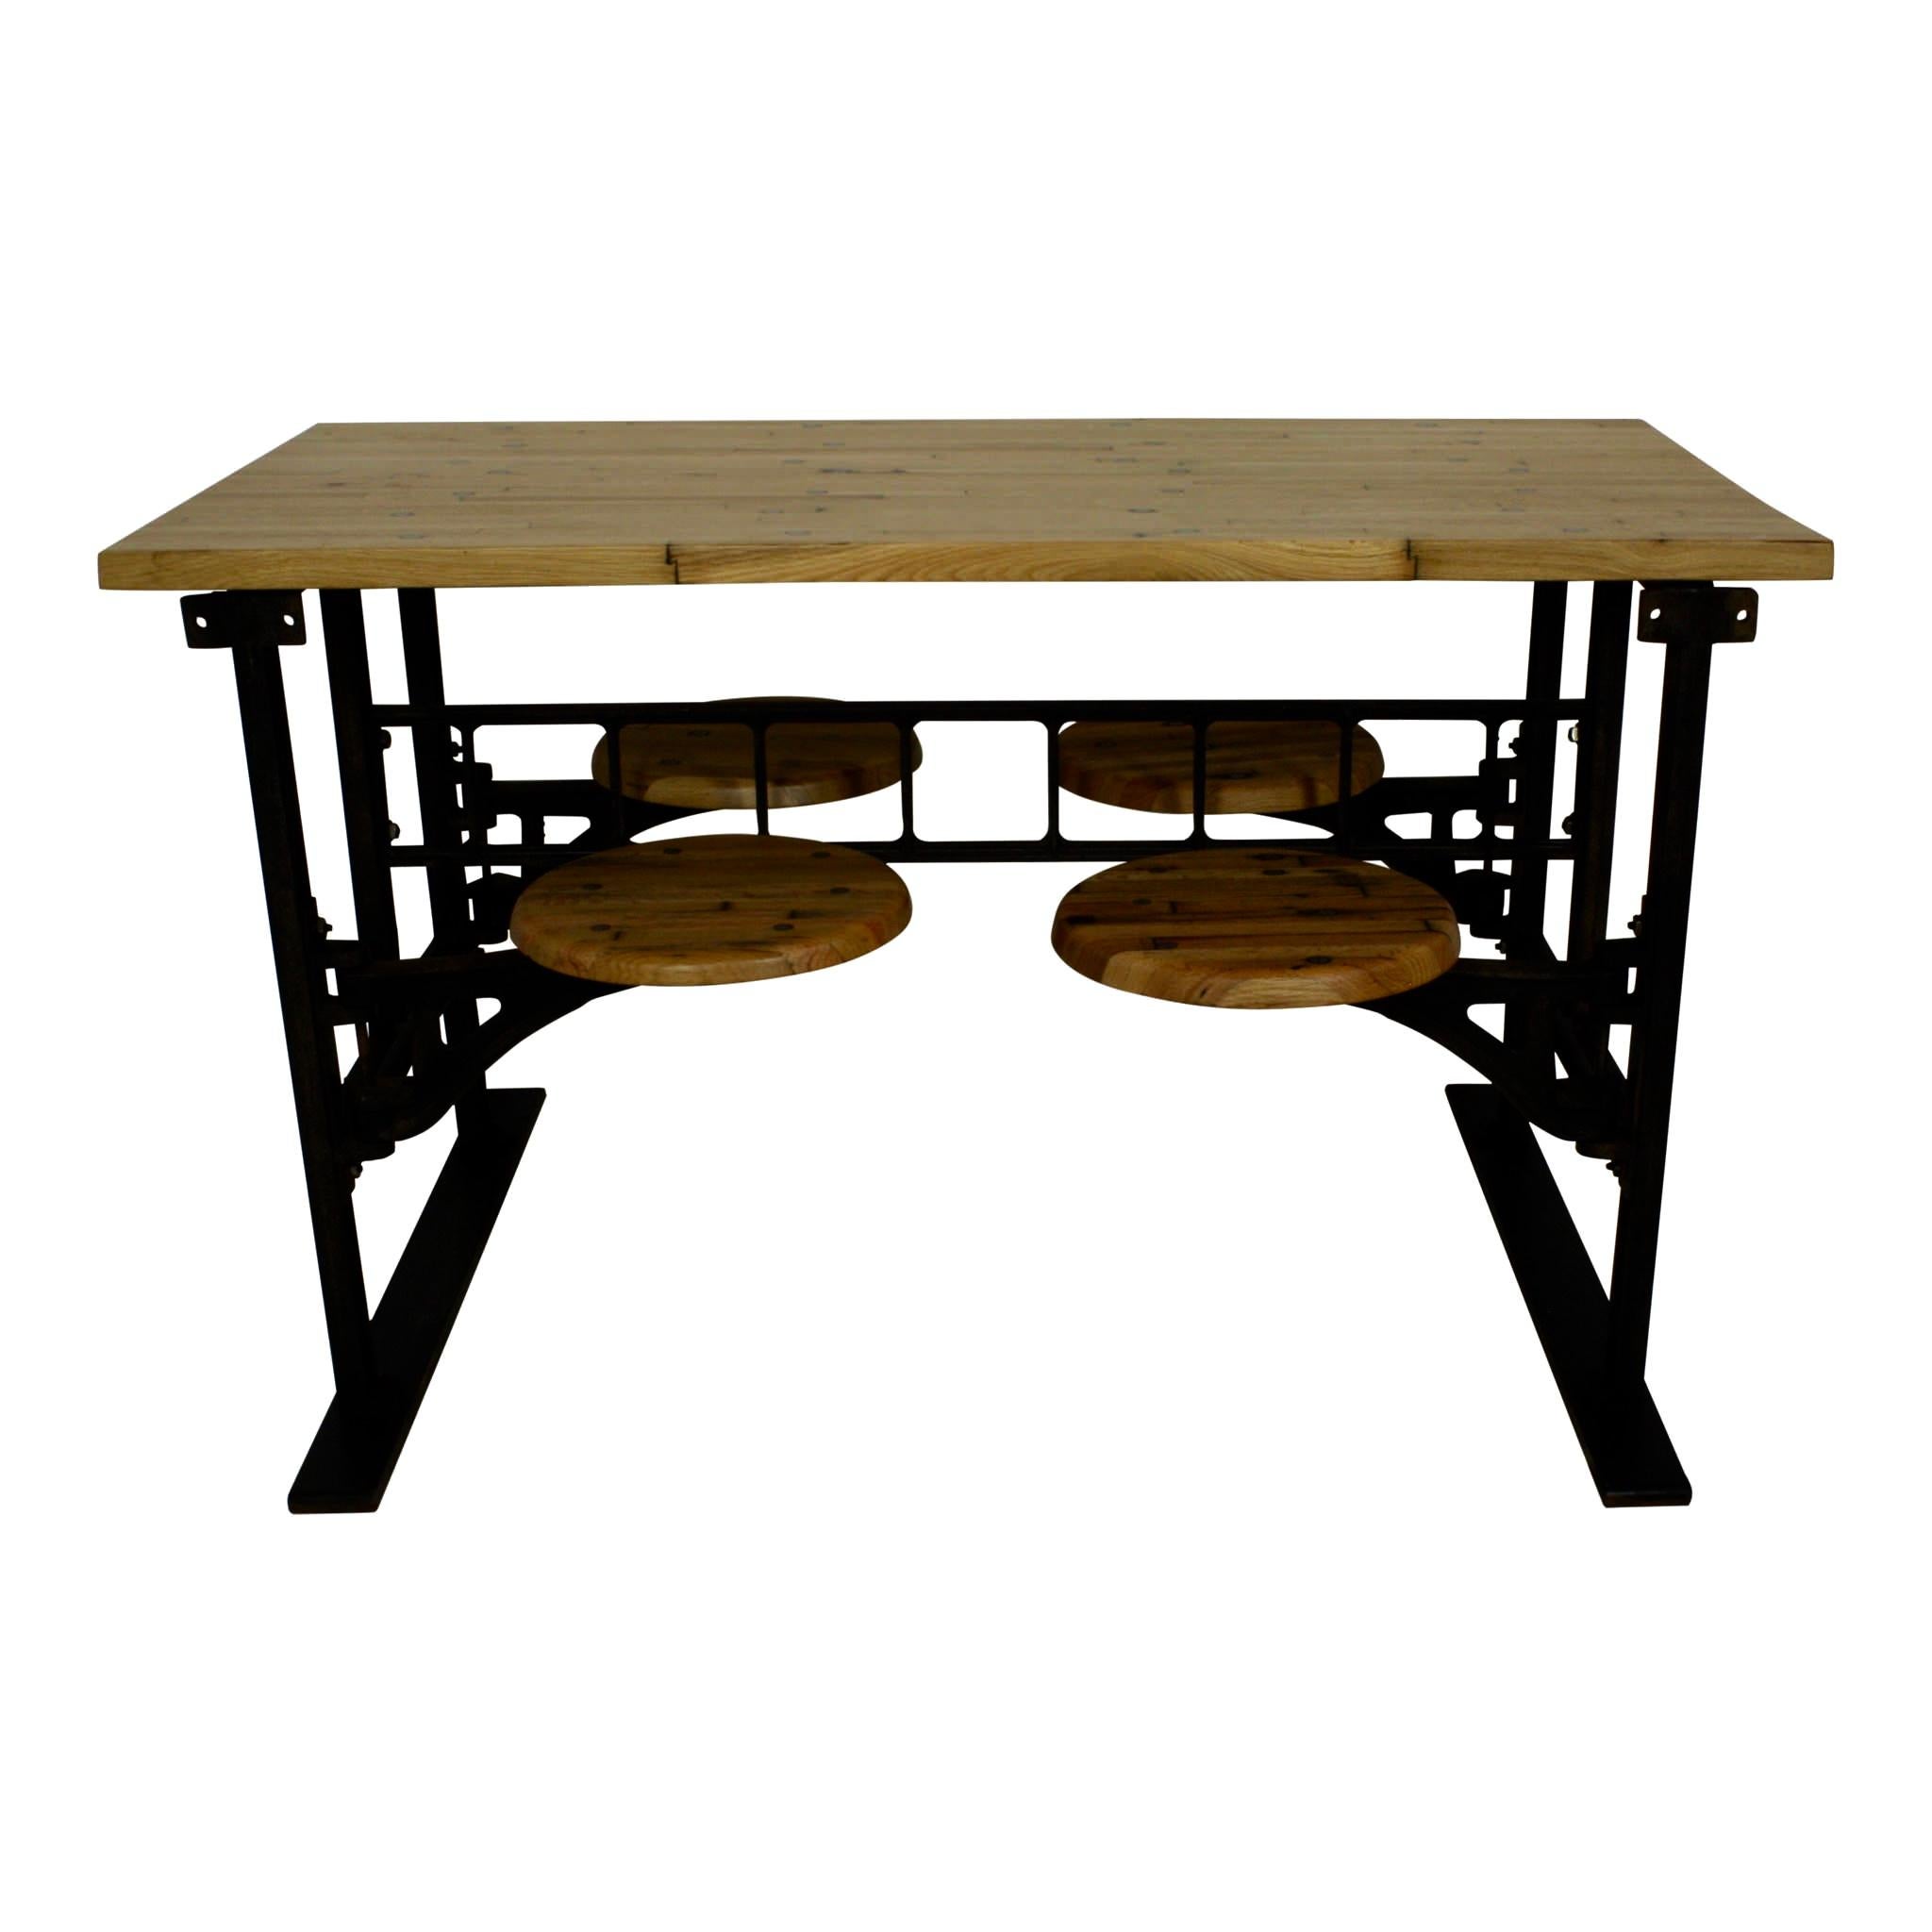 This industrial table with seating features a reclaimed butcher block top, maple seats, and a cast iron frame. Large screws were used to secure the wood to the frame and complete the Industrial look. The set was designed as a replica of factory and